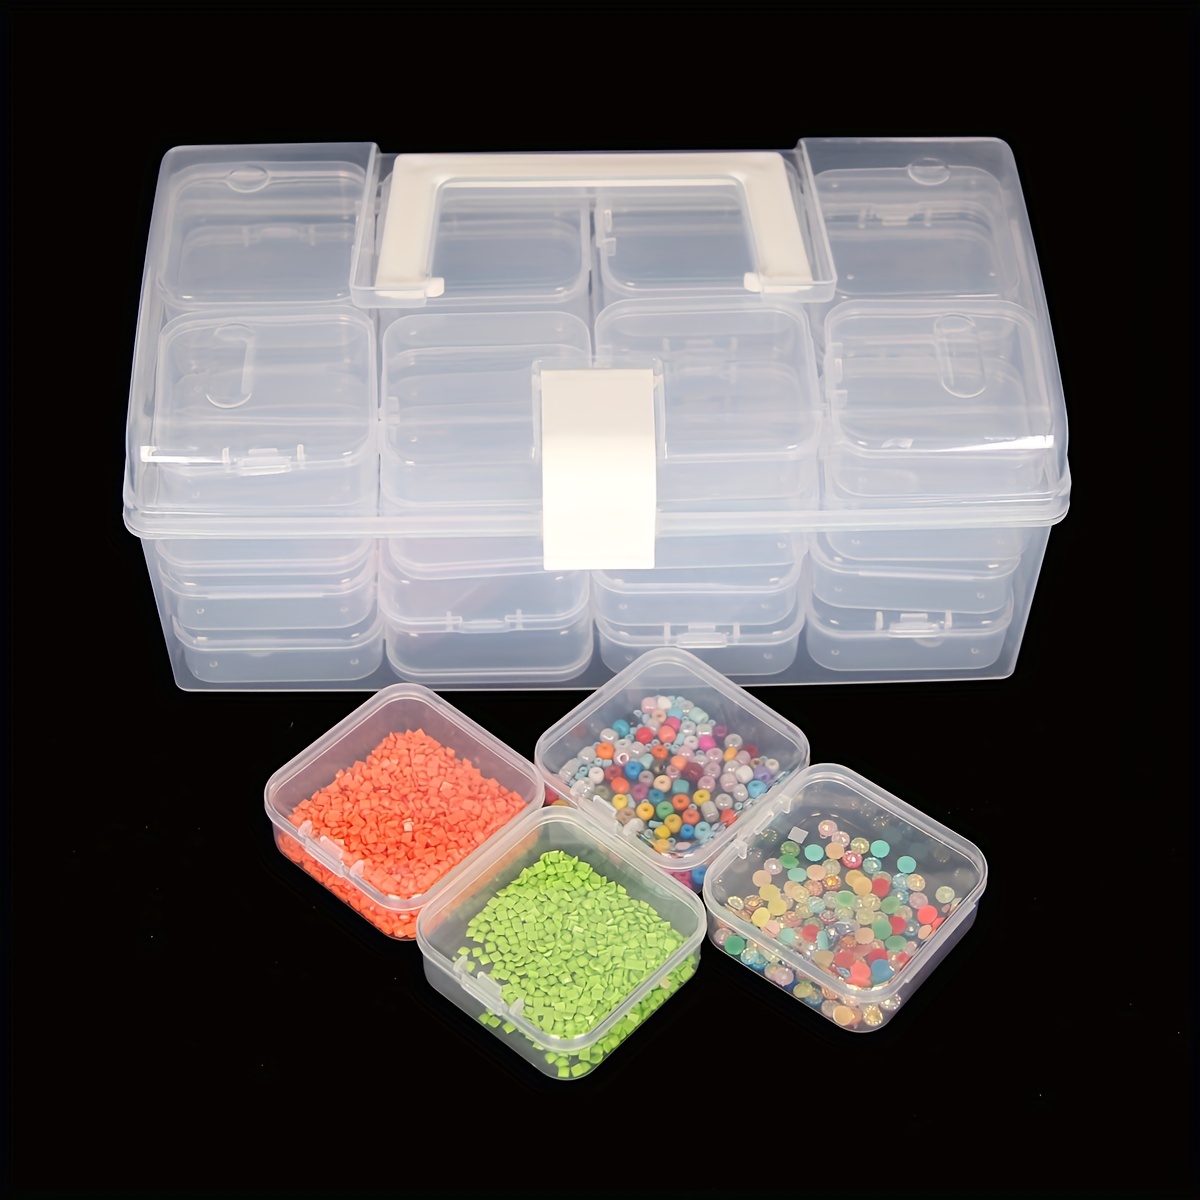 Small Plastic Case For Small Items Clay Bead Container Small